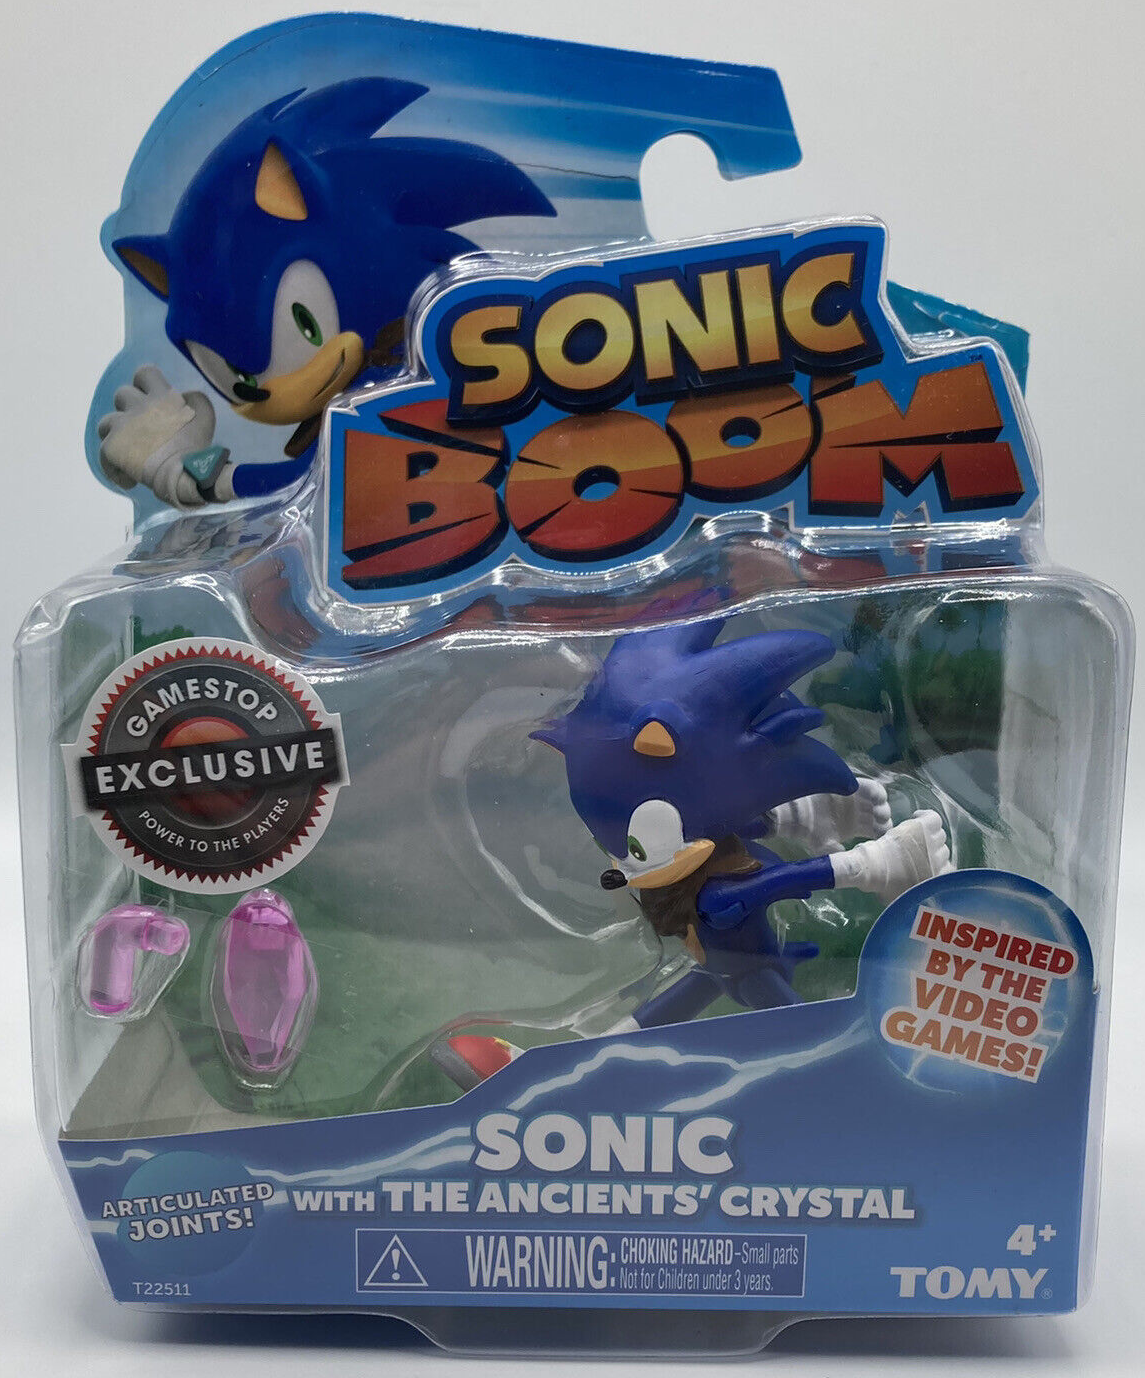 SONIC BOOM: SONIC WITH ANCIENTS' CRYSTAL - TOMY-EXCLUSIVE